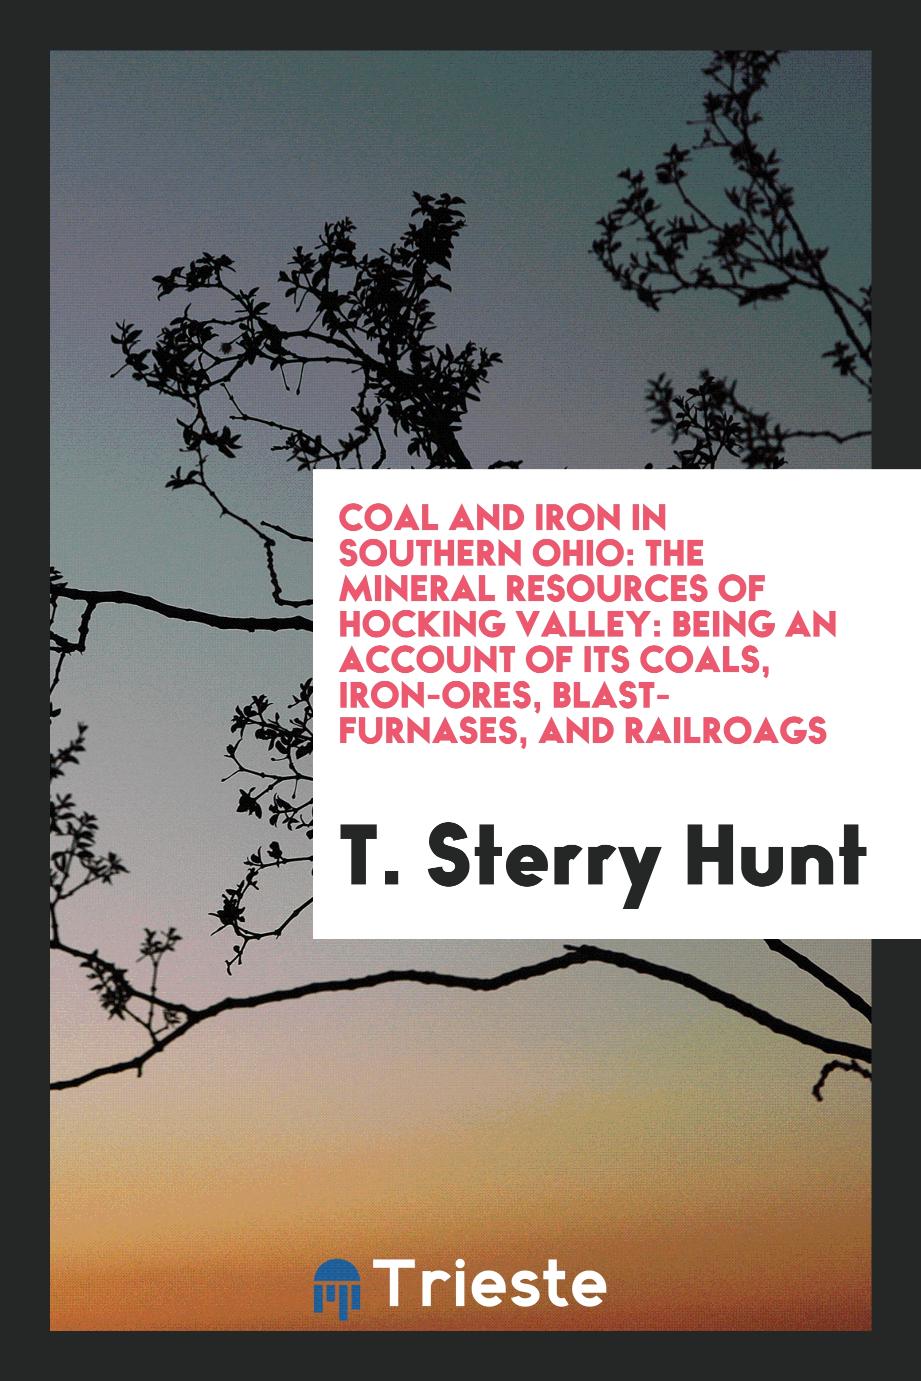 Coal and Iron in Southern Ohio: The Mineral Resources of Hocking Valley: Being an Account of Its Coals, Iron-Ores, Blast-Furnases, and Railroags